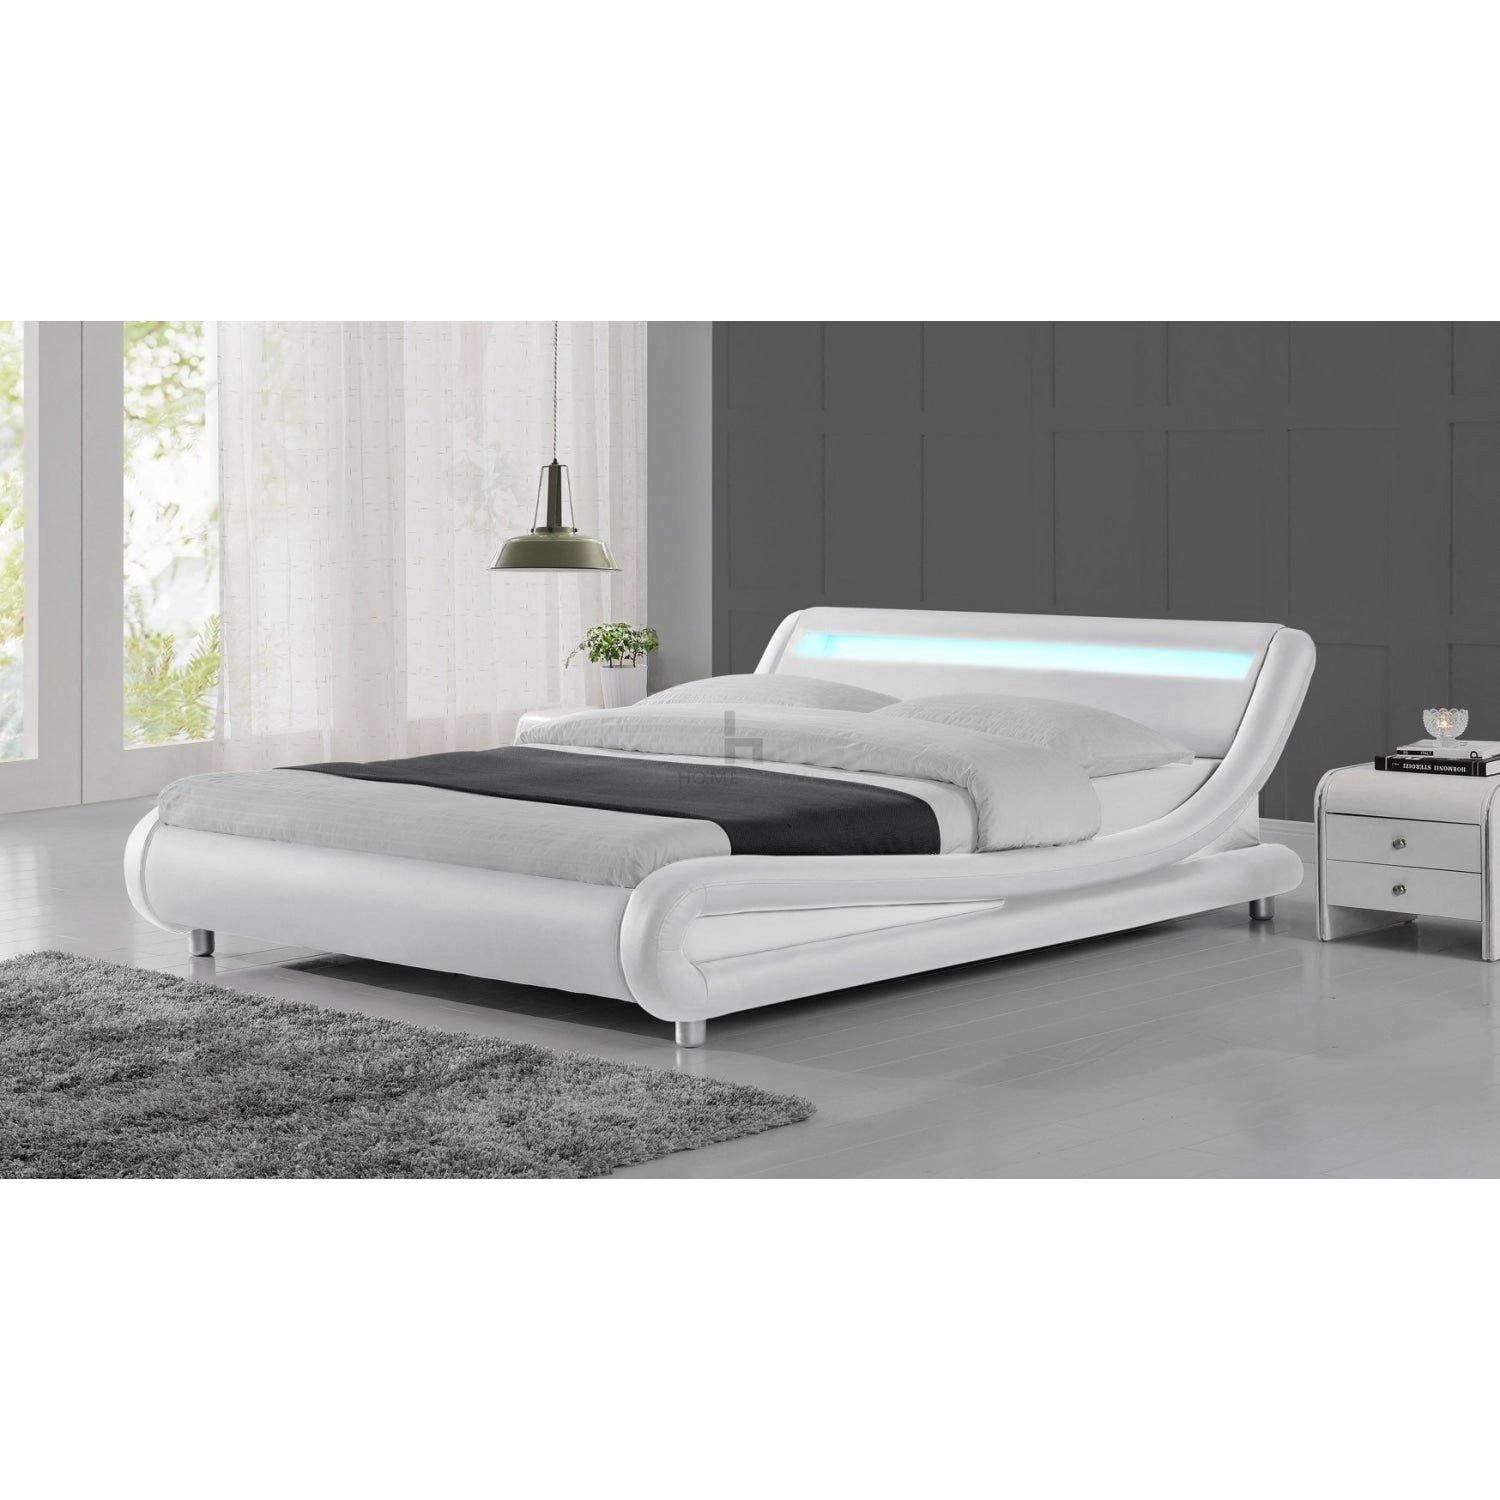 Galaxy LED White Faux Leather Bed